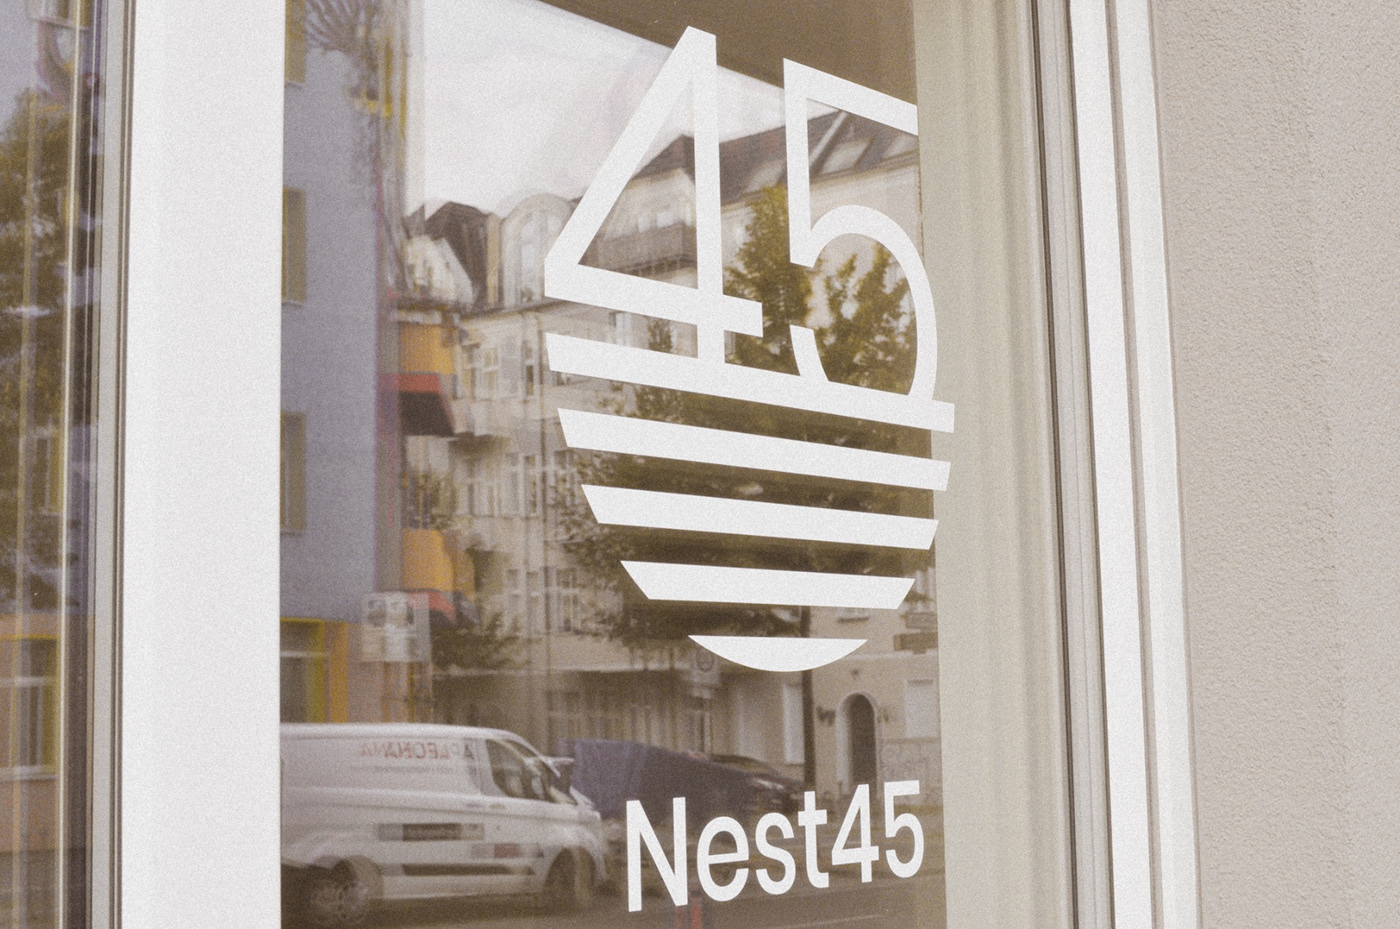 berlin Estate brand germany home immobilien lifestyle luxury brand nest ocio real estate